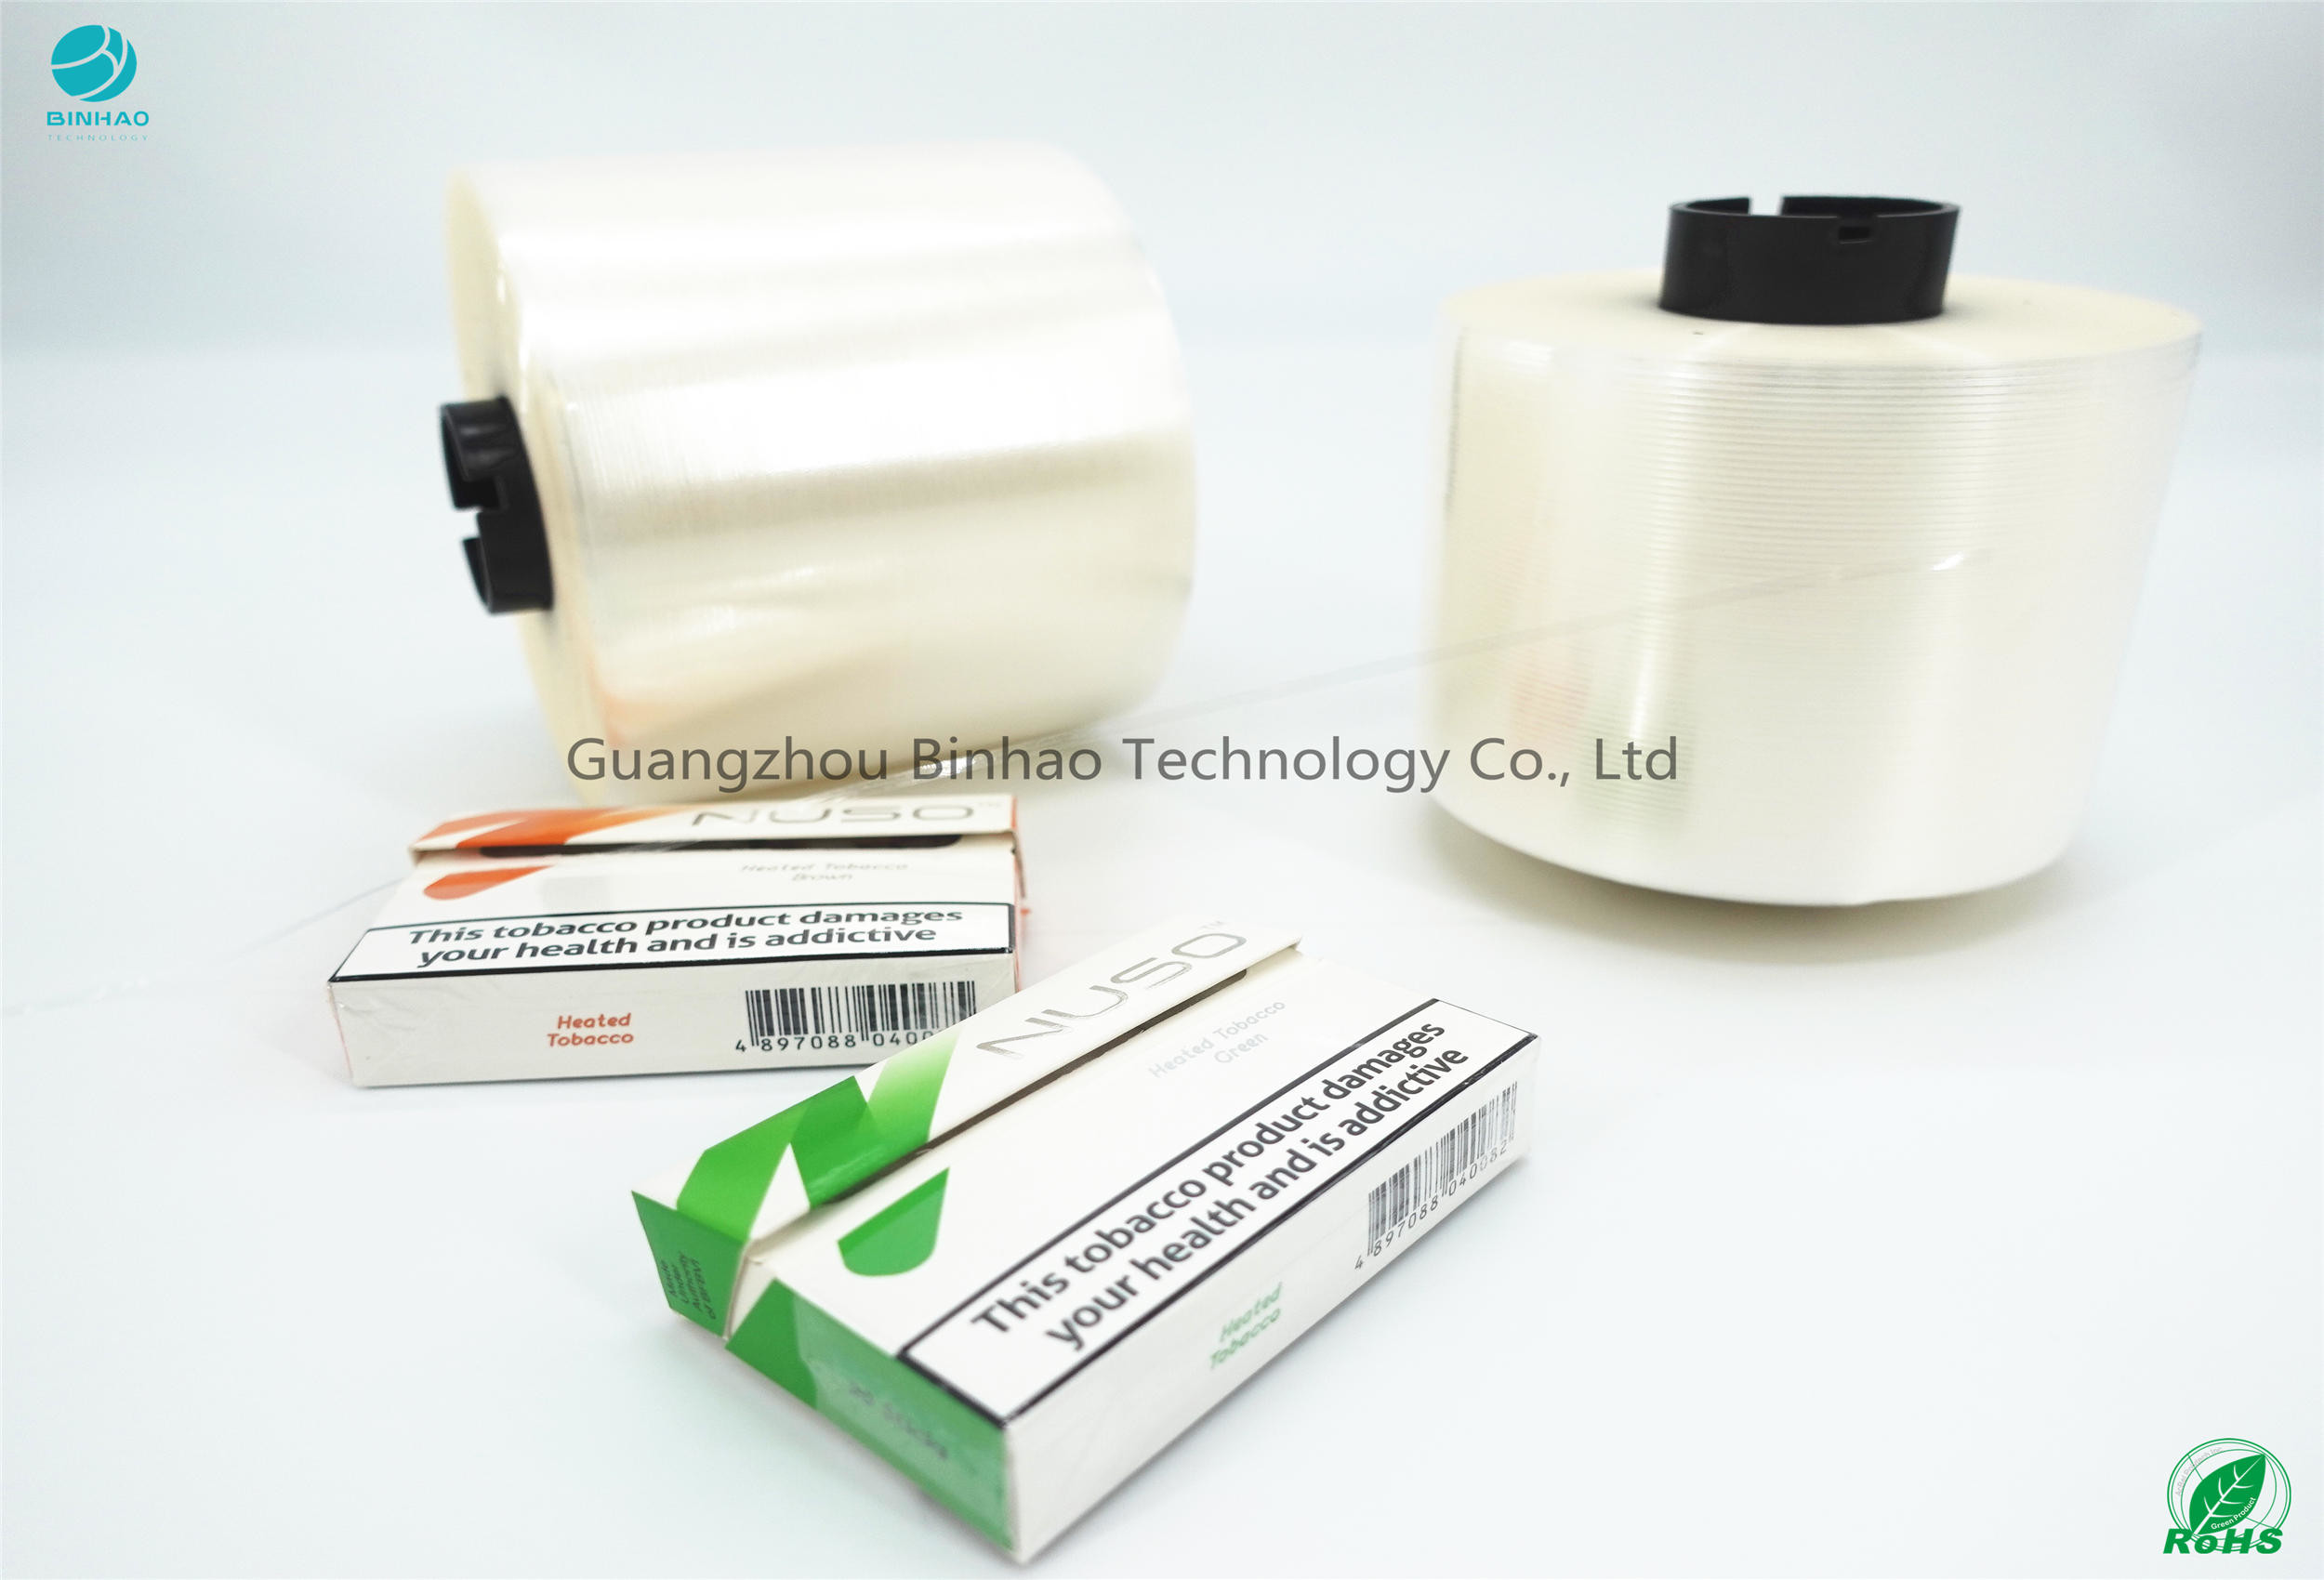 50% Resistance Heat Not Burn E-Cigarette Package Materials Tear Strip Tape By Hand